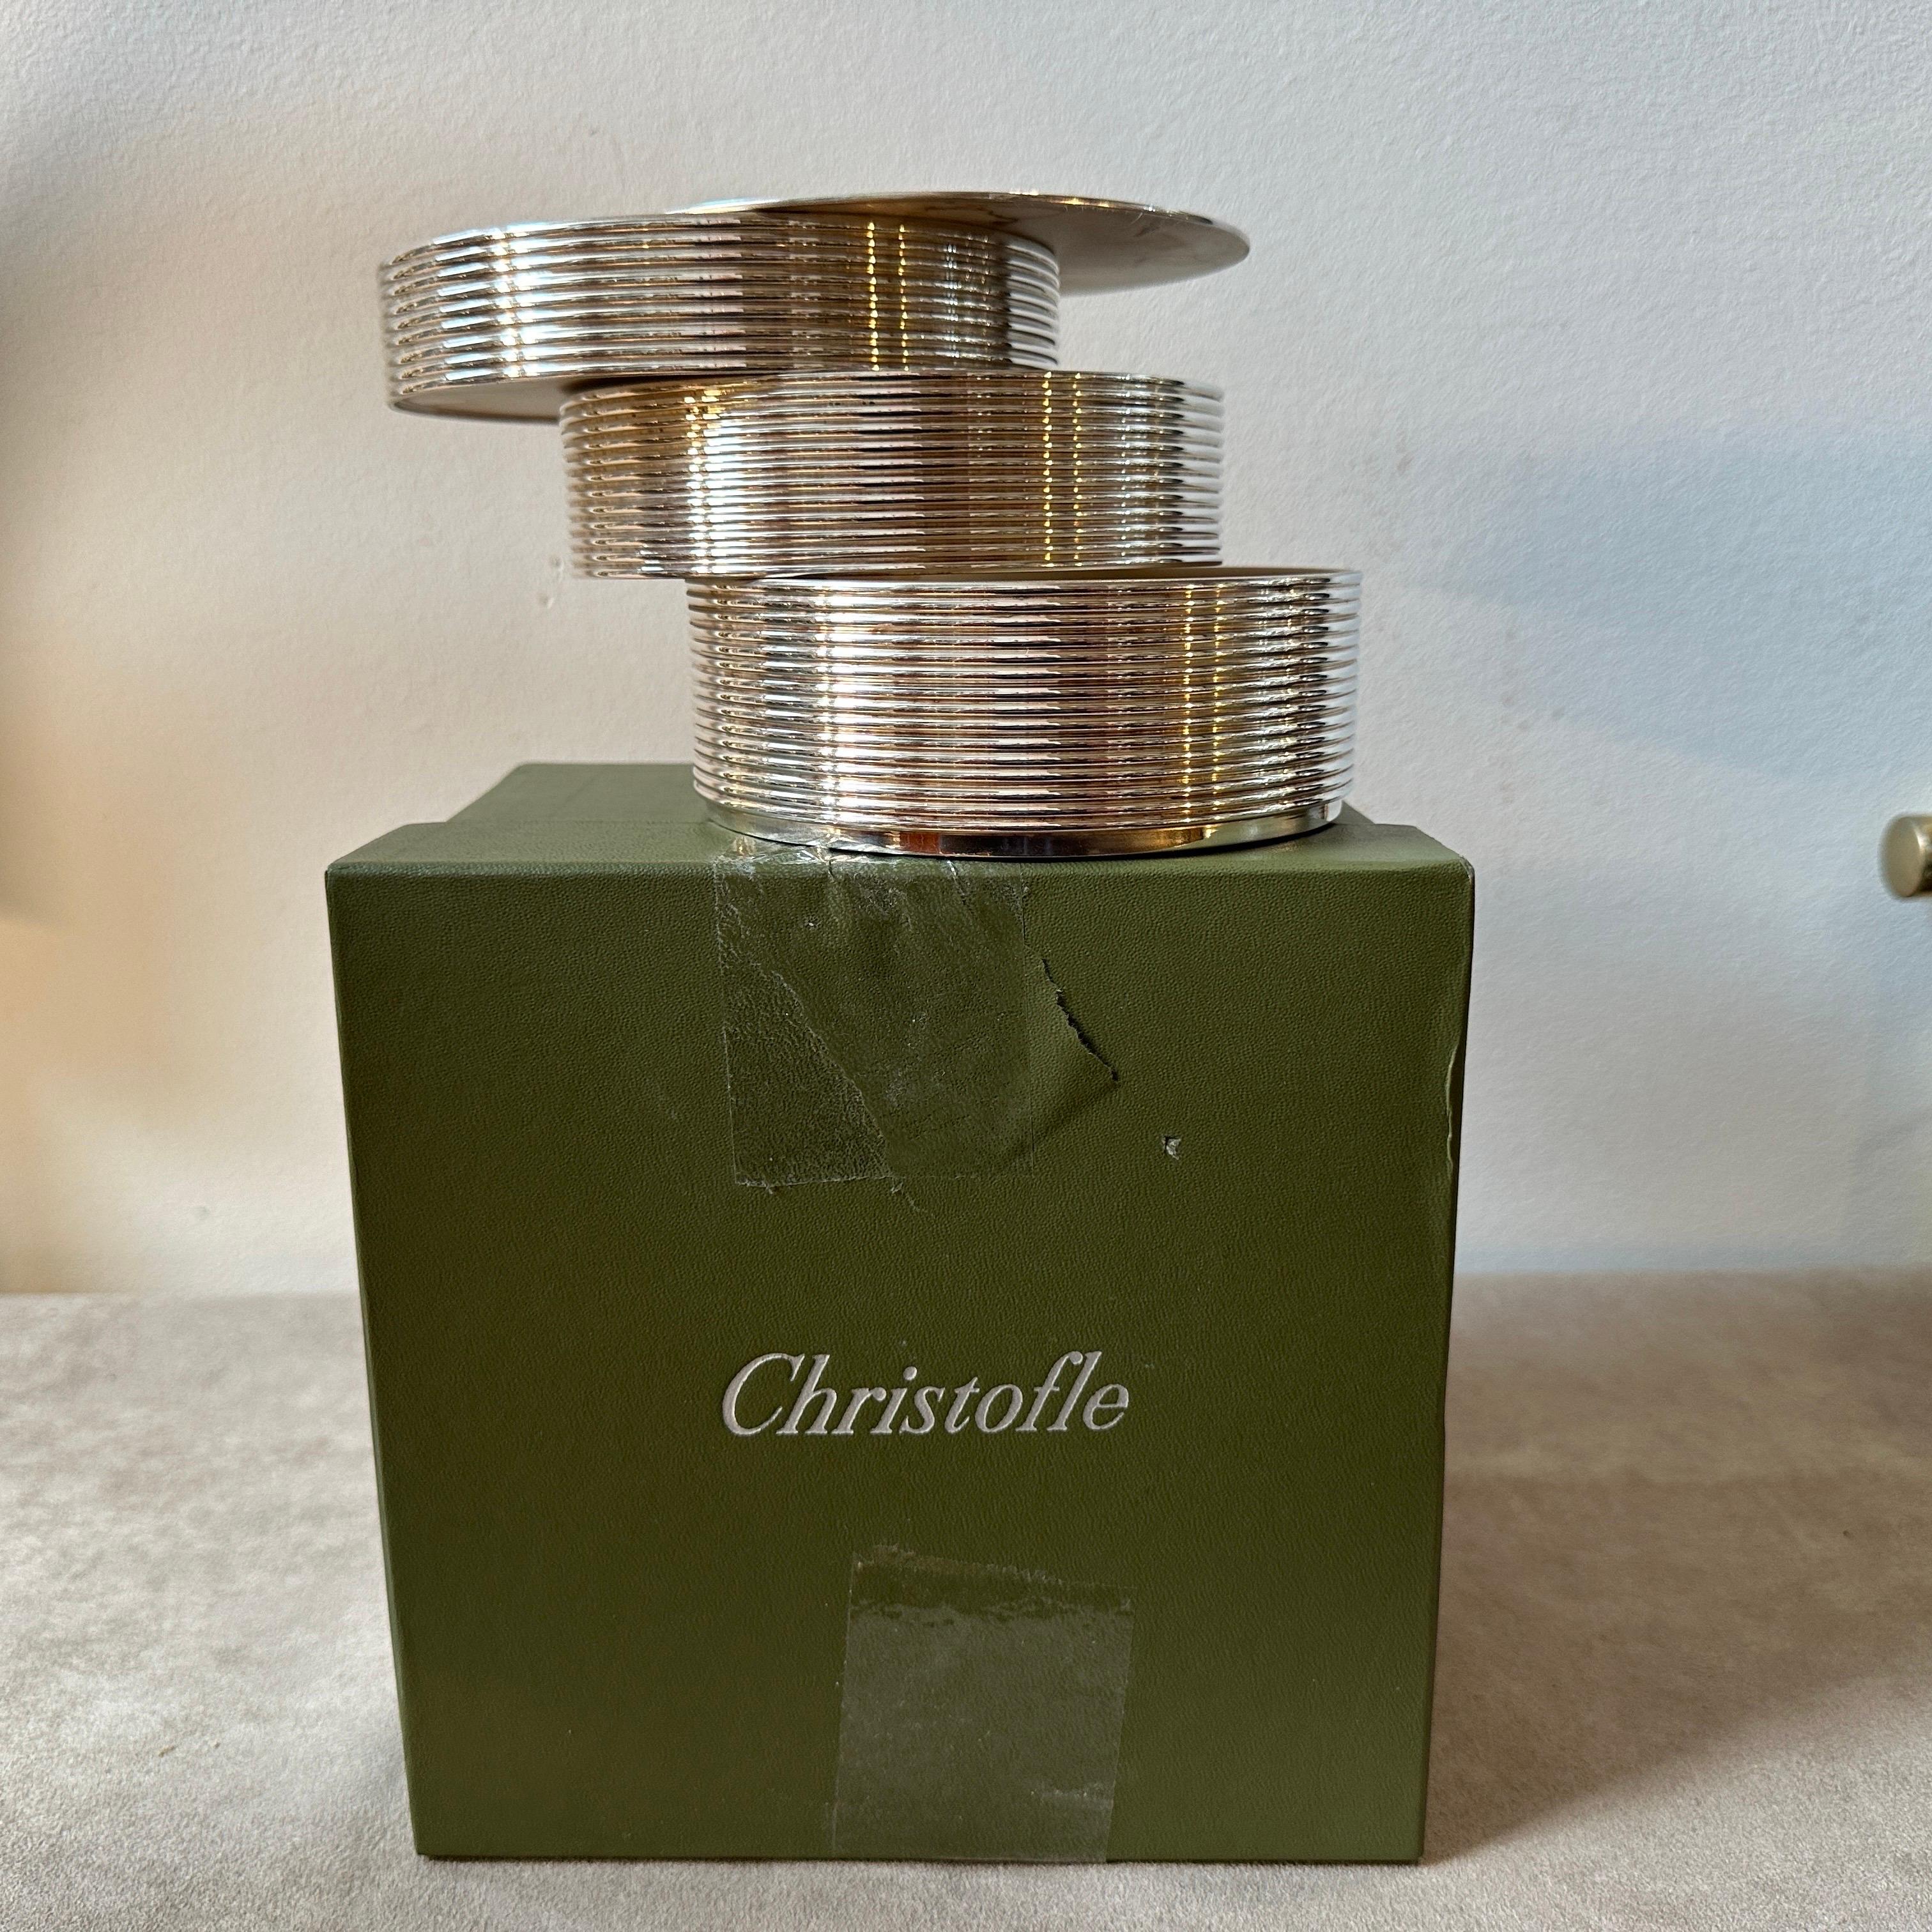 1990s Modern Design Silver Plated French Jewelry Box by Christofle For Sale 5